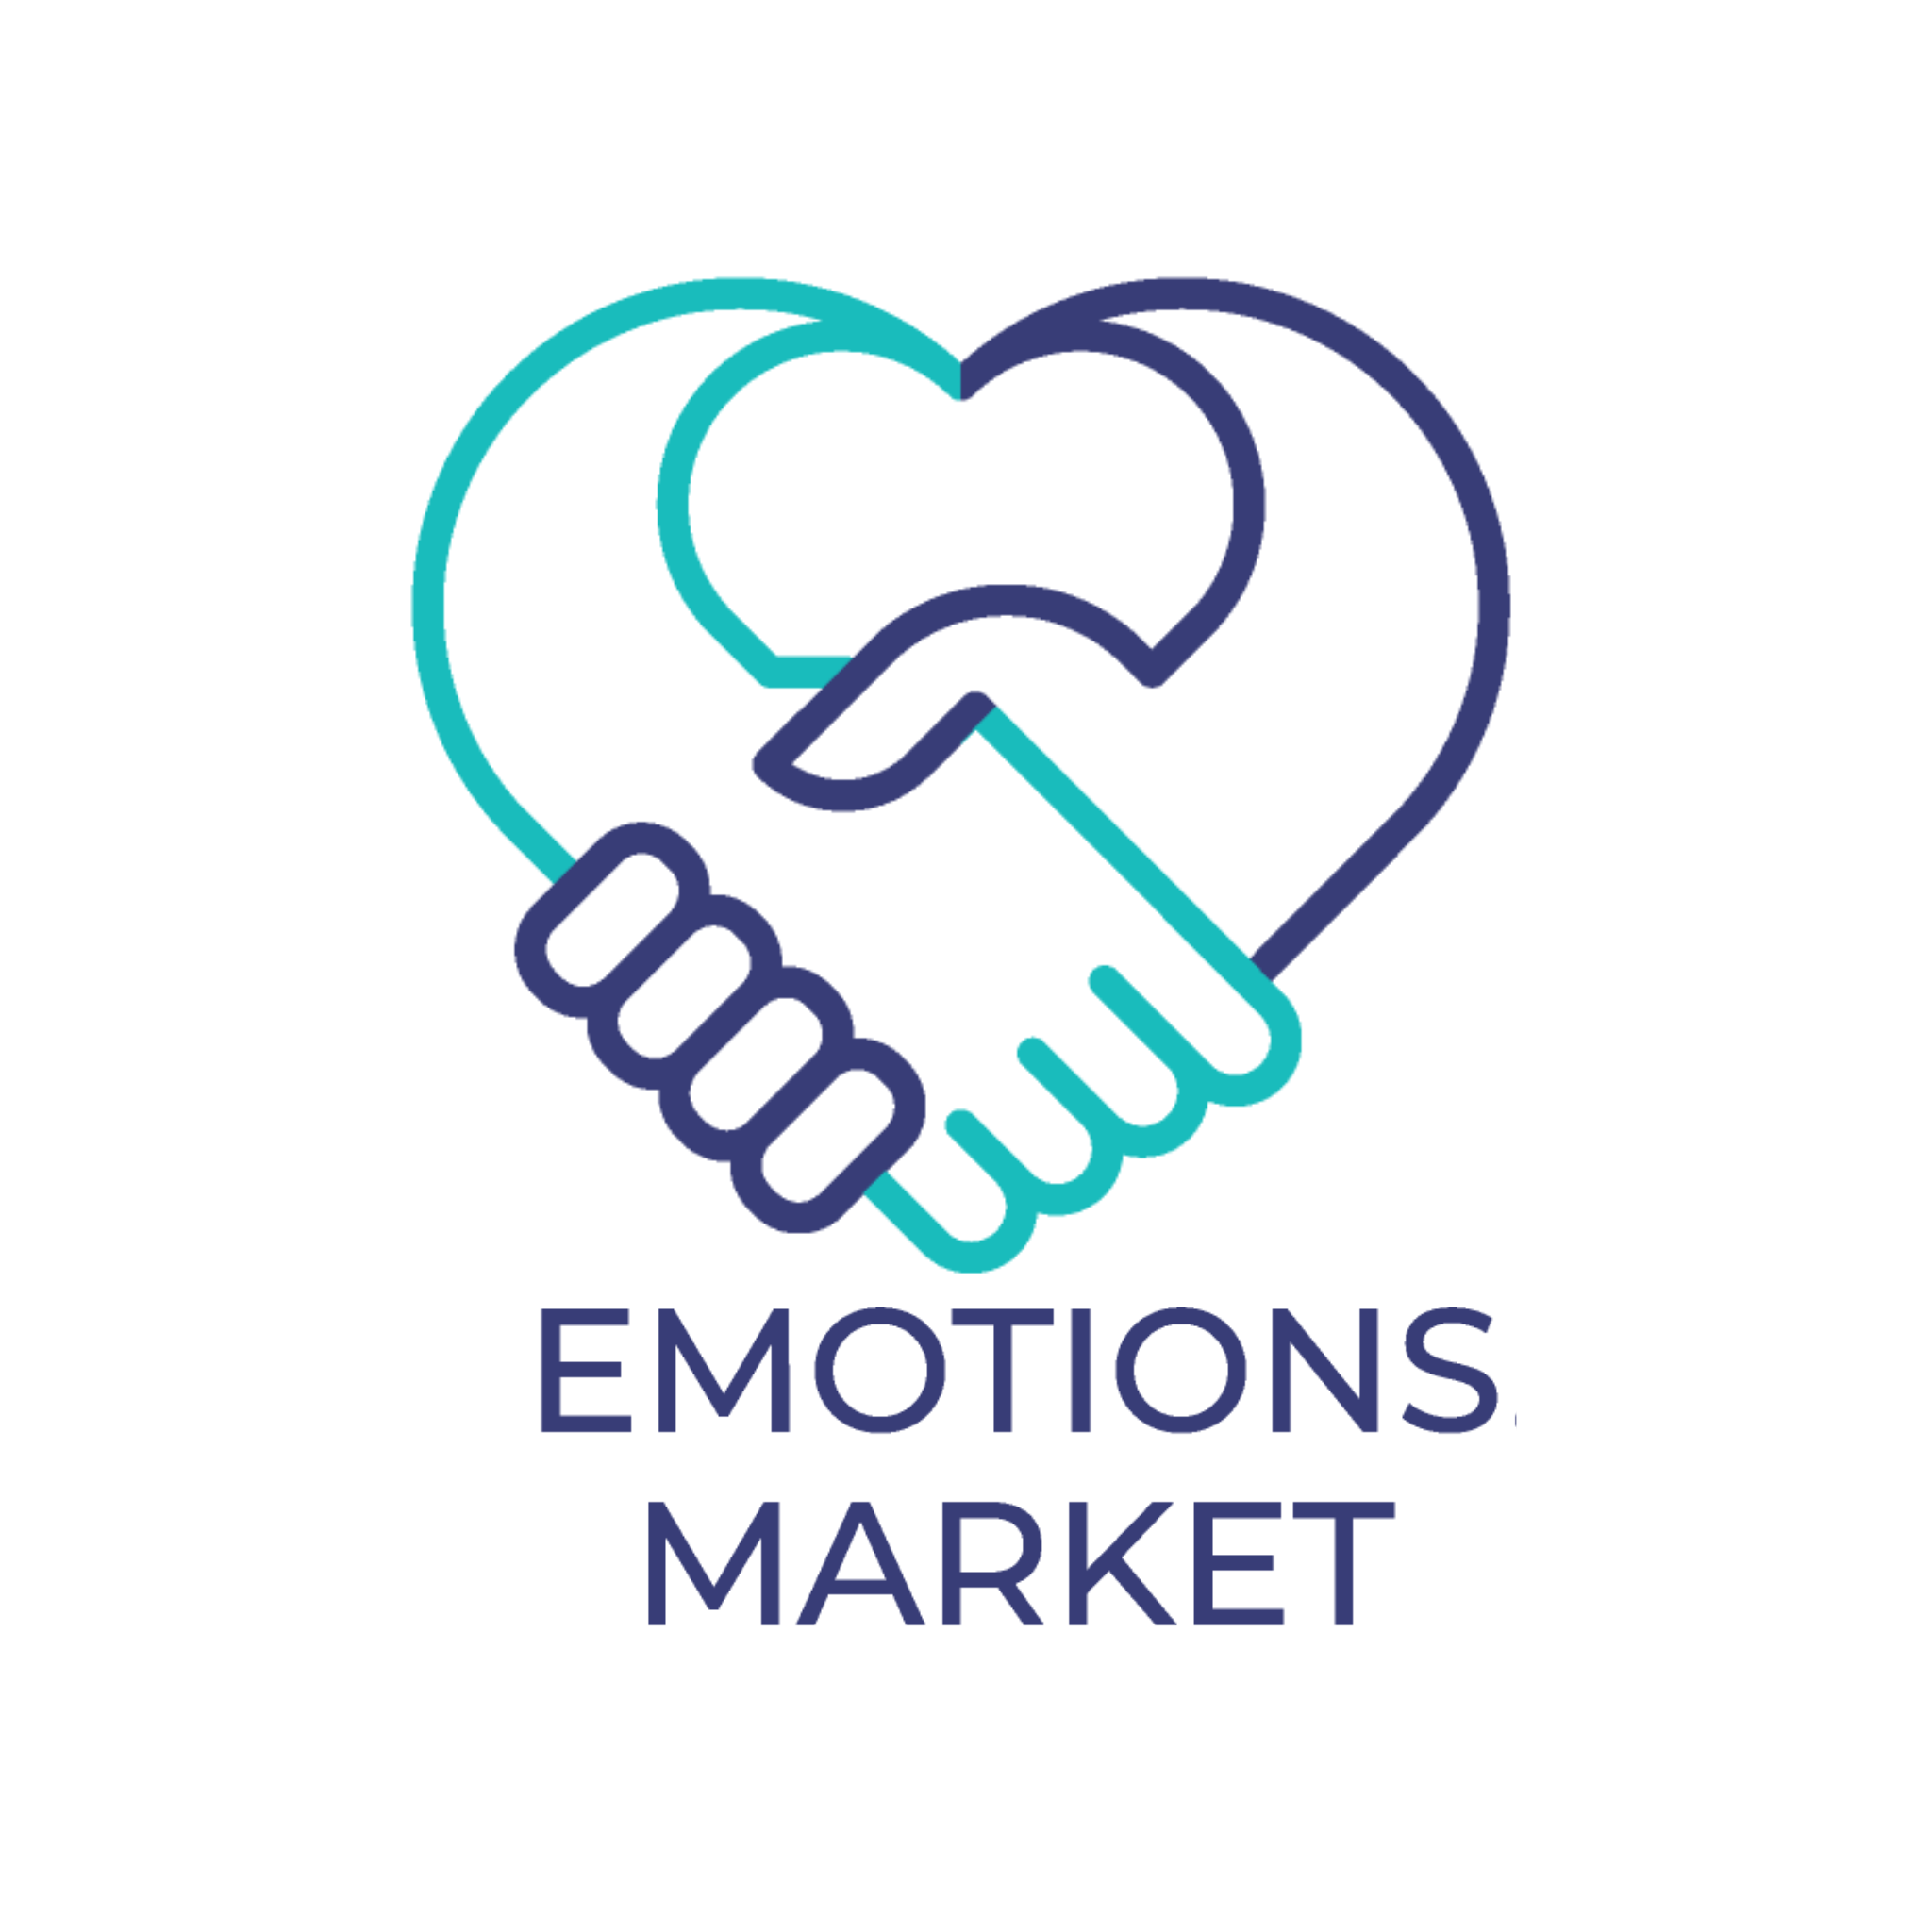 Logo of Emotions Market a classified ad board for multisensory and emotion-provoking experiences